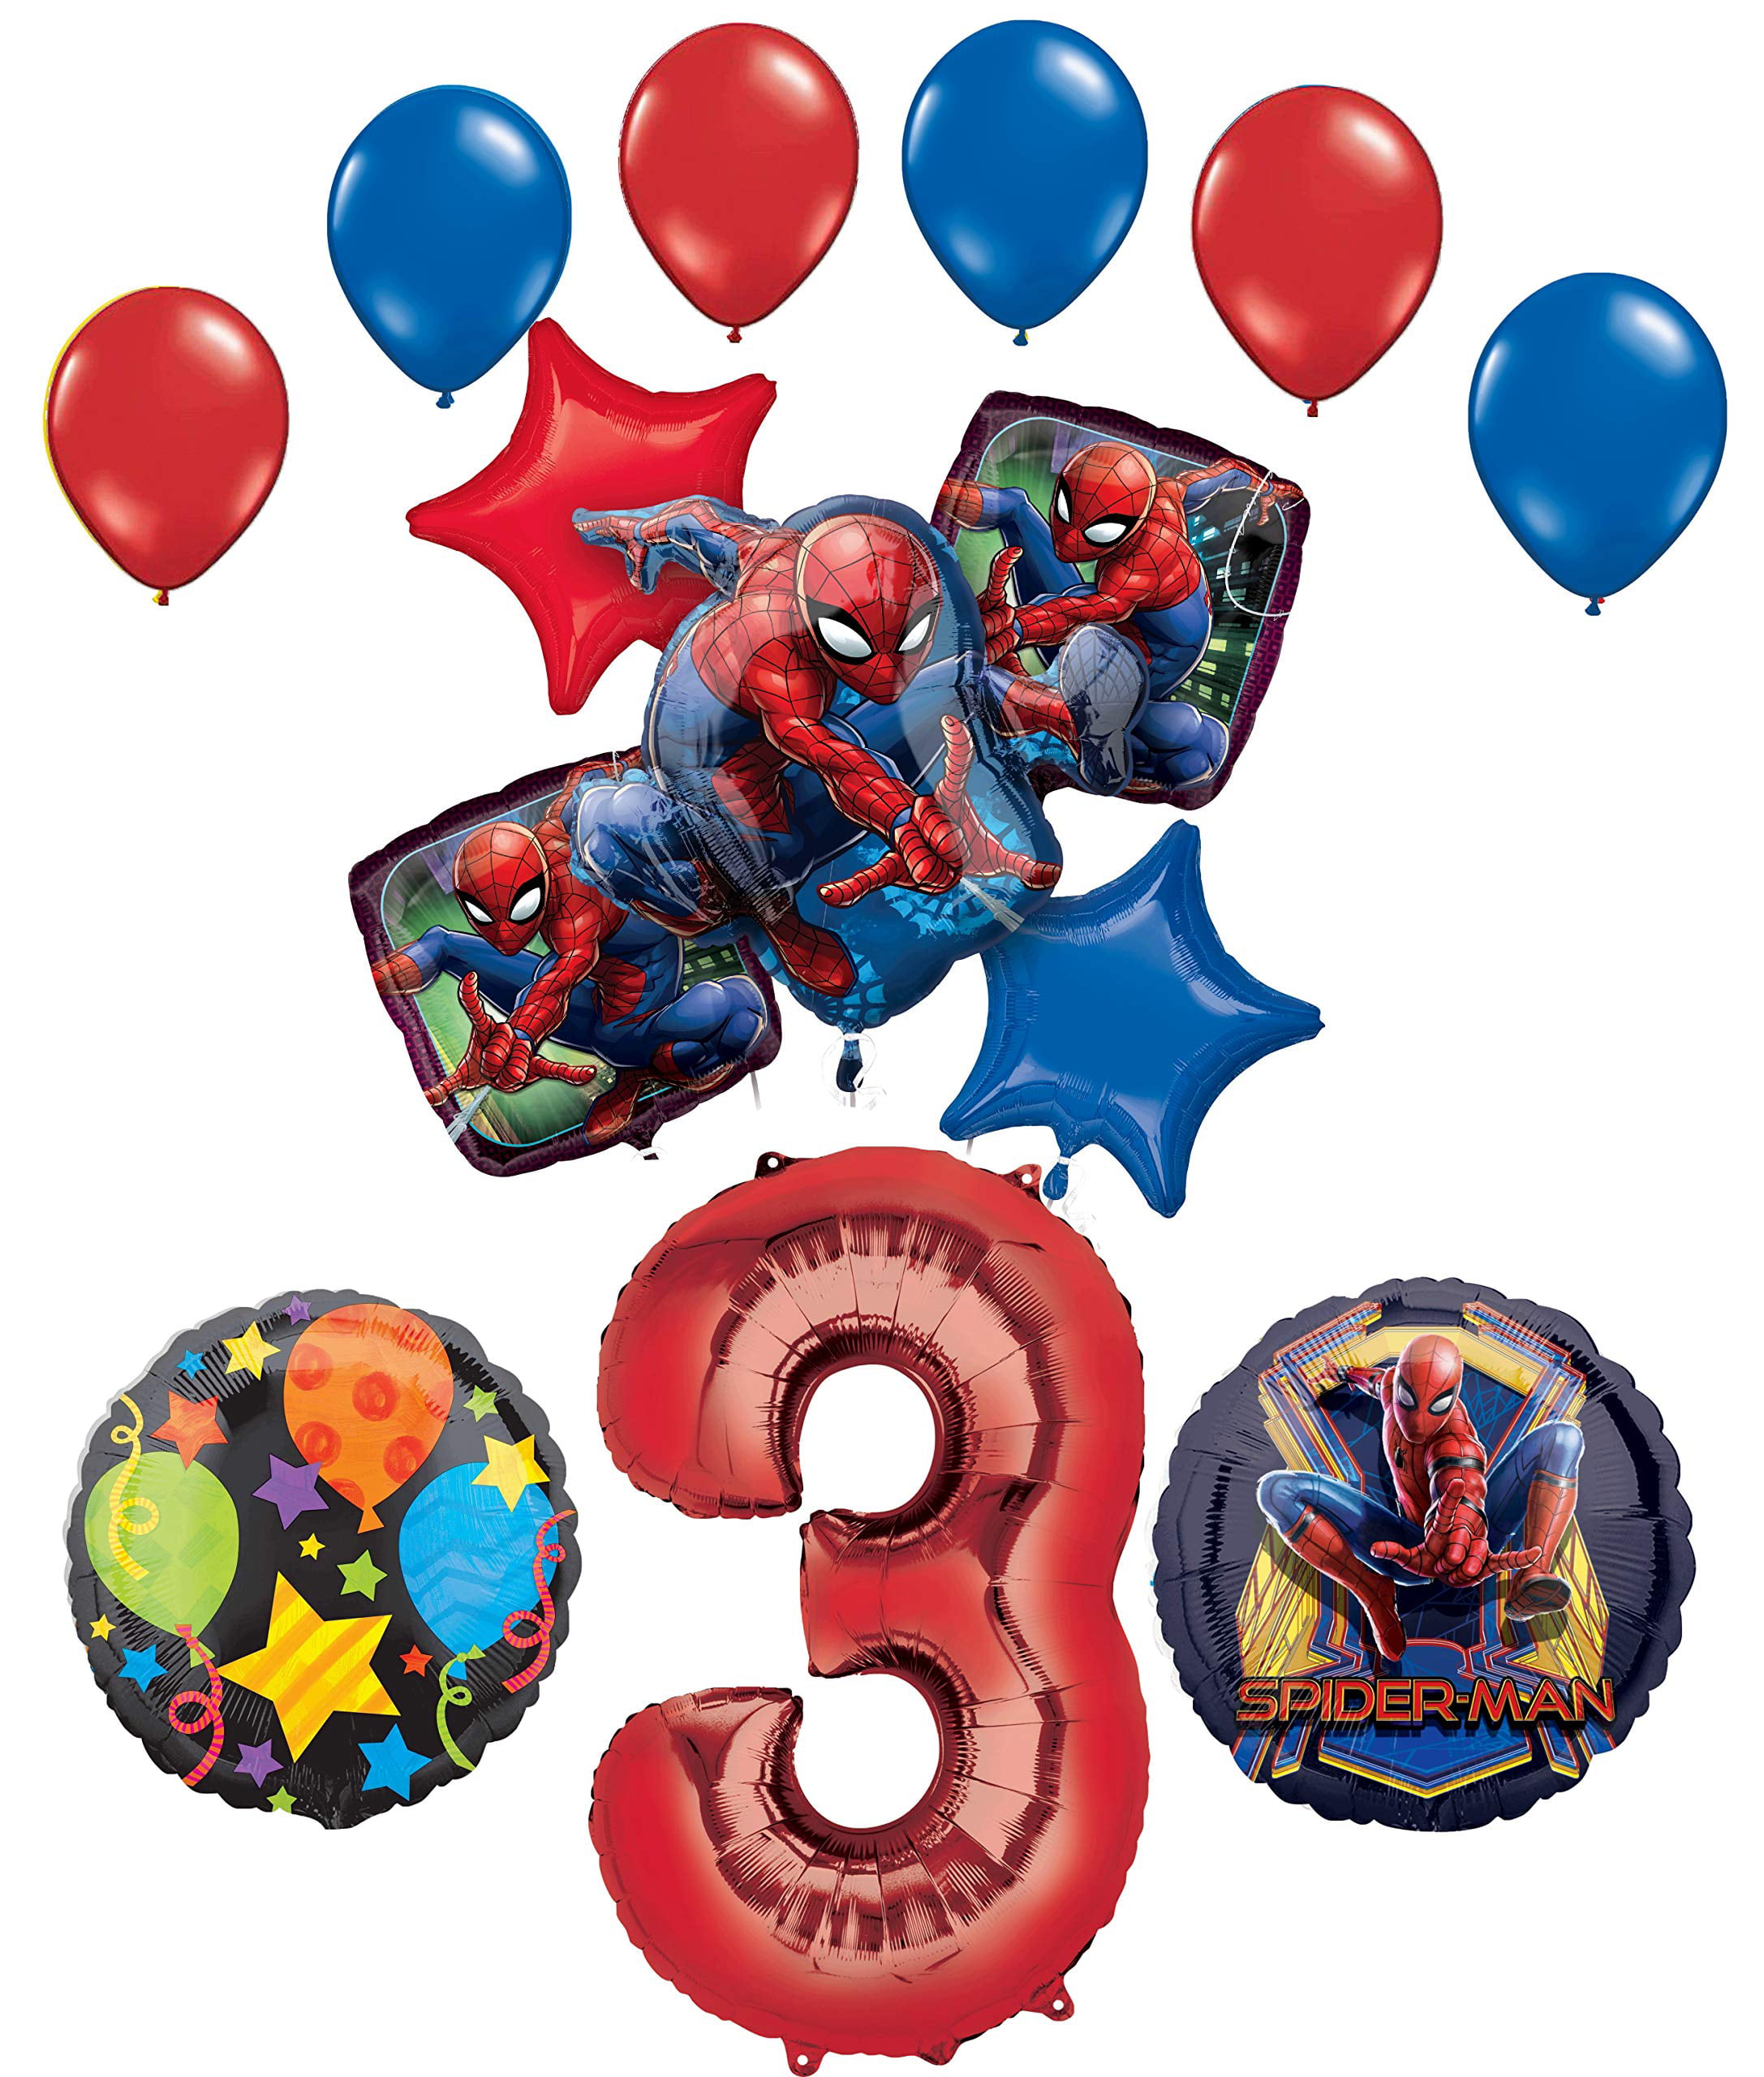 Spiderman 2 Party for 8 eight Birthday PArty PAck Plates Cups Balloons more 